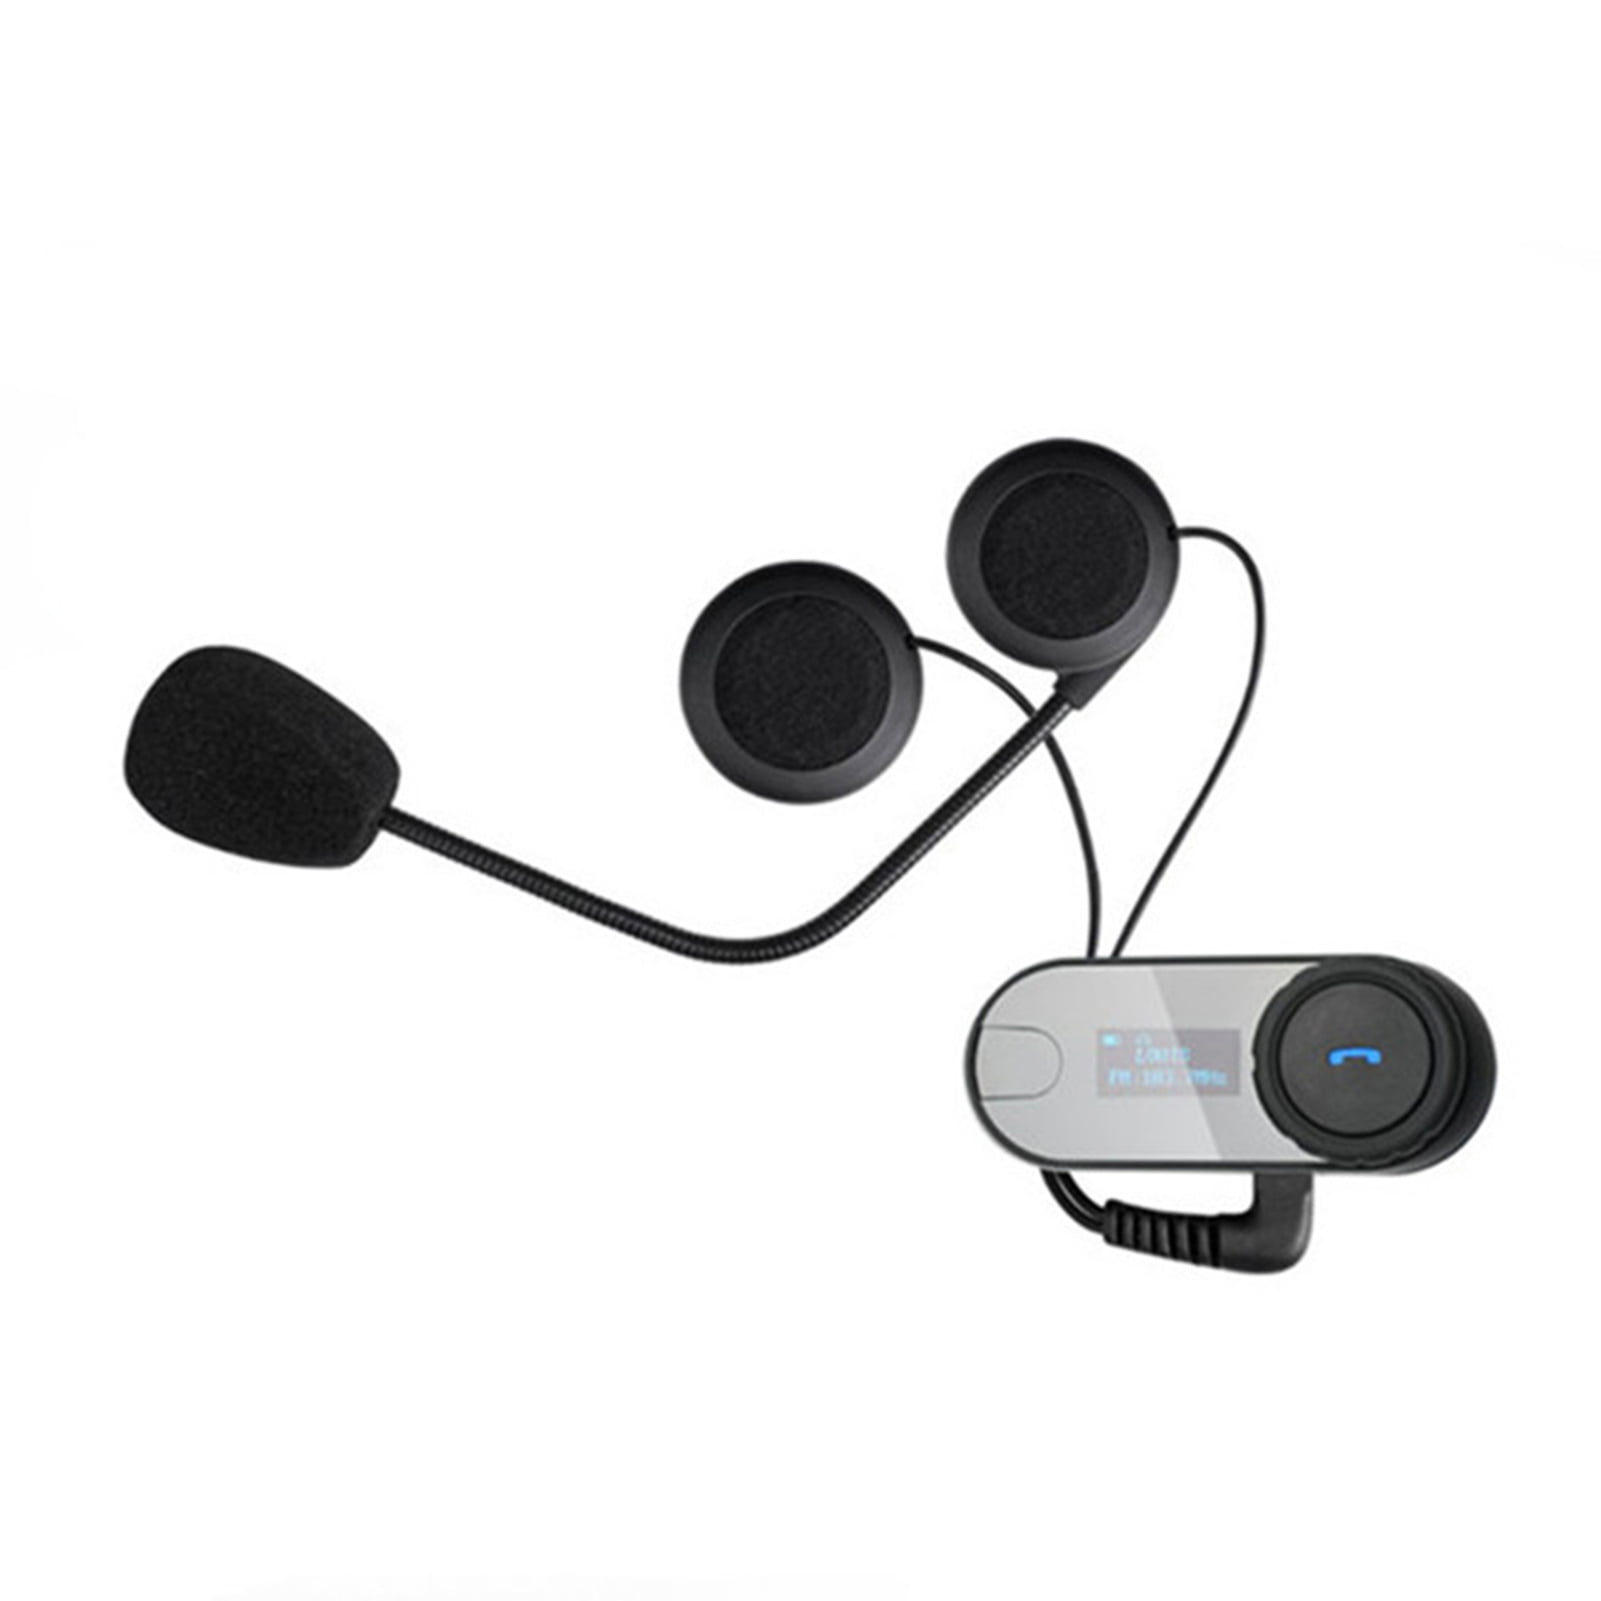 Farfi T-COMSC Interphone Headset Bluetooth-compatible 3 People Switch Intercom Headphone Head-mounted Earphone with FM for Riding Motorcycle -